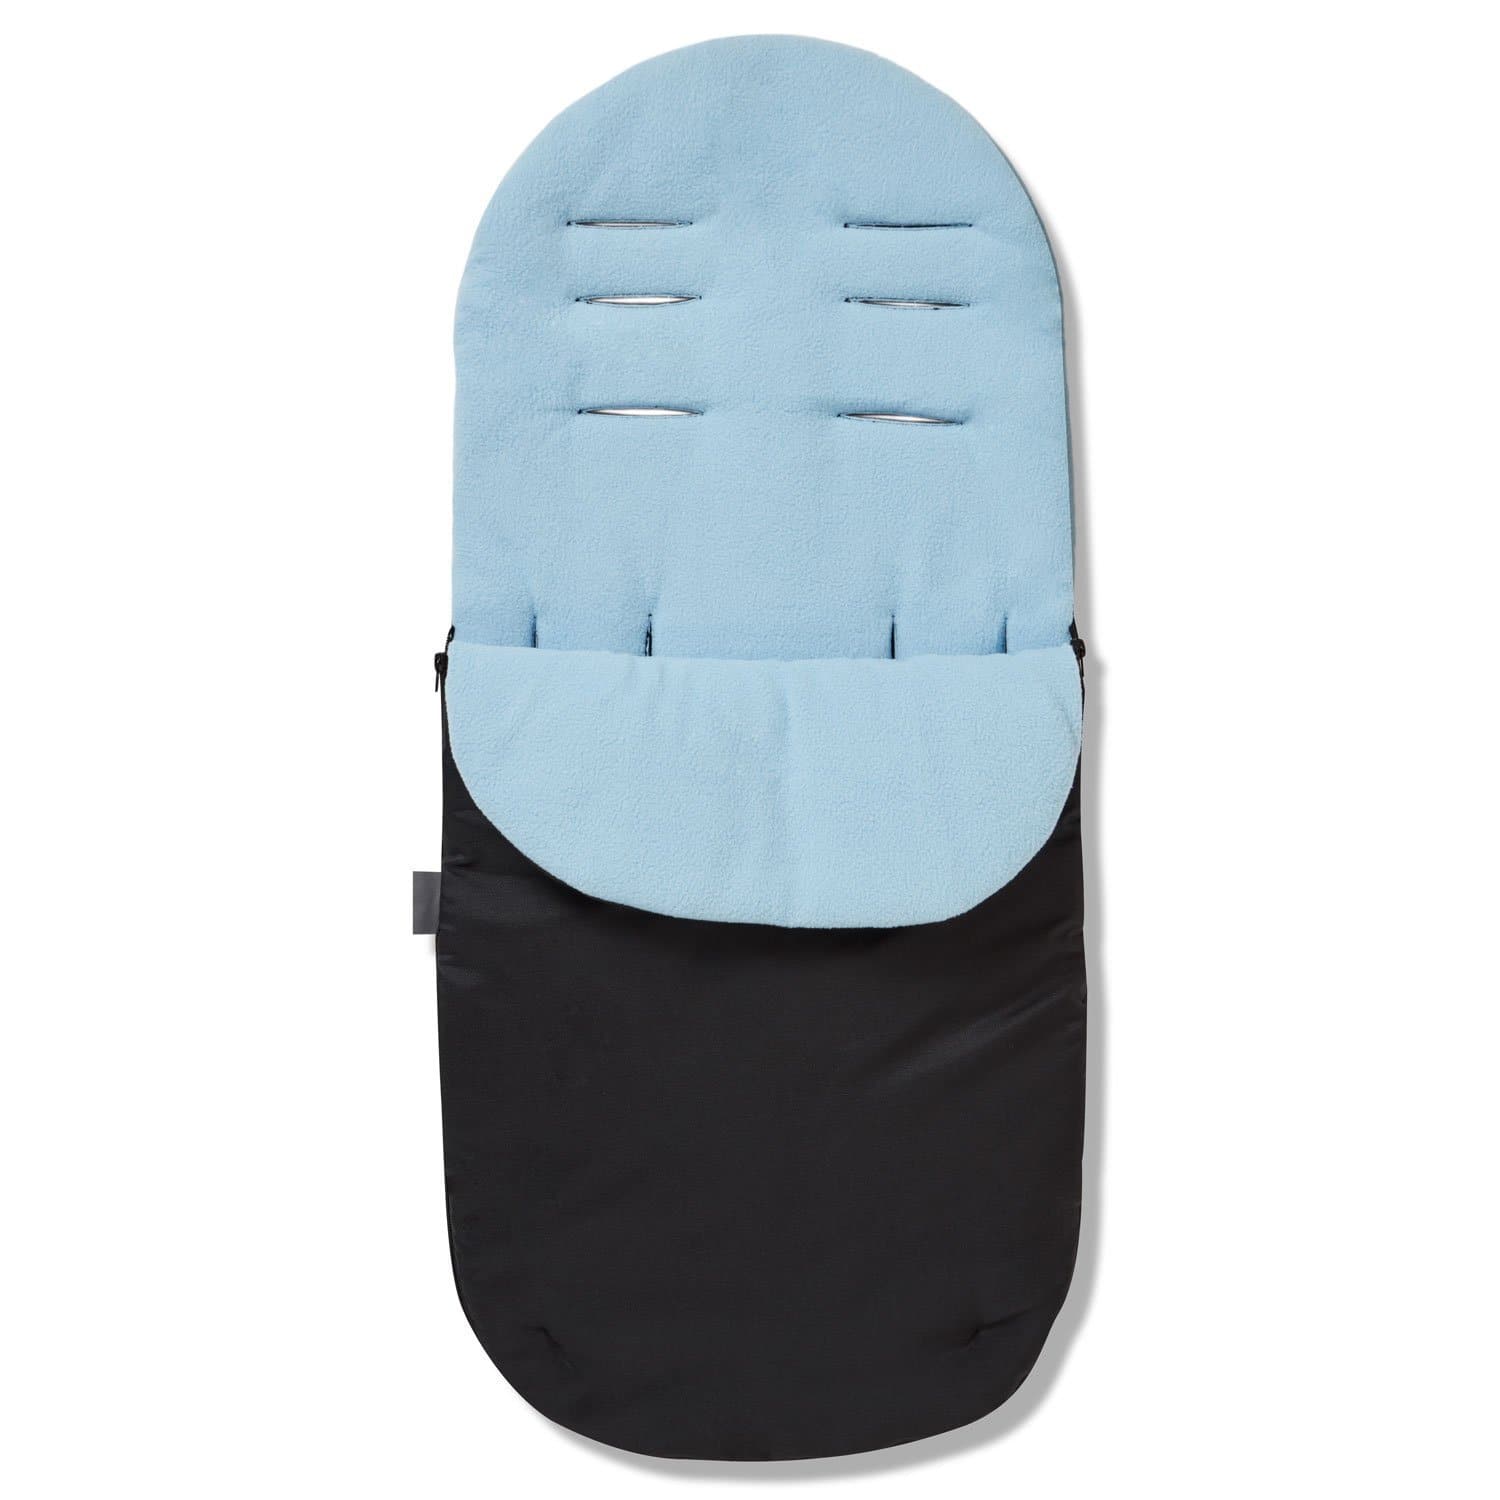 Footmuff / Cosy Toes Compatible with Zooper - For Your Little One